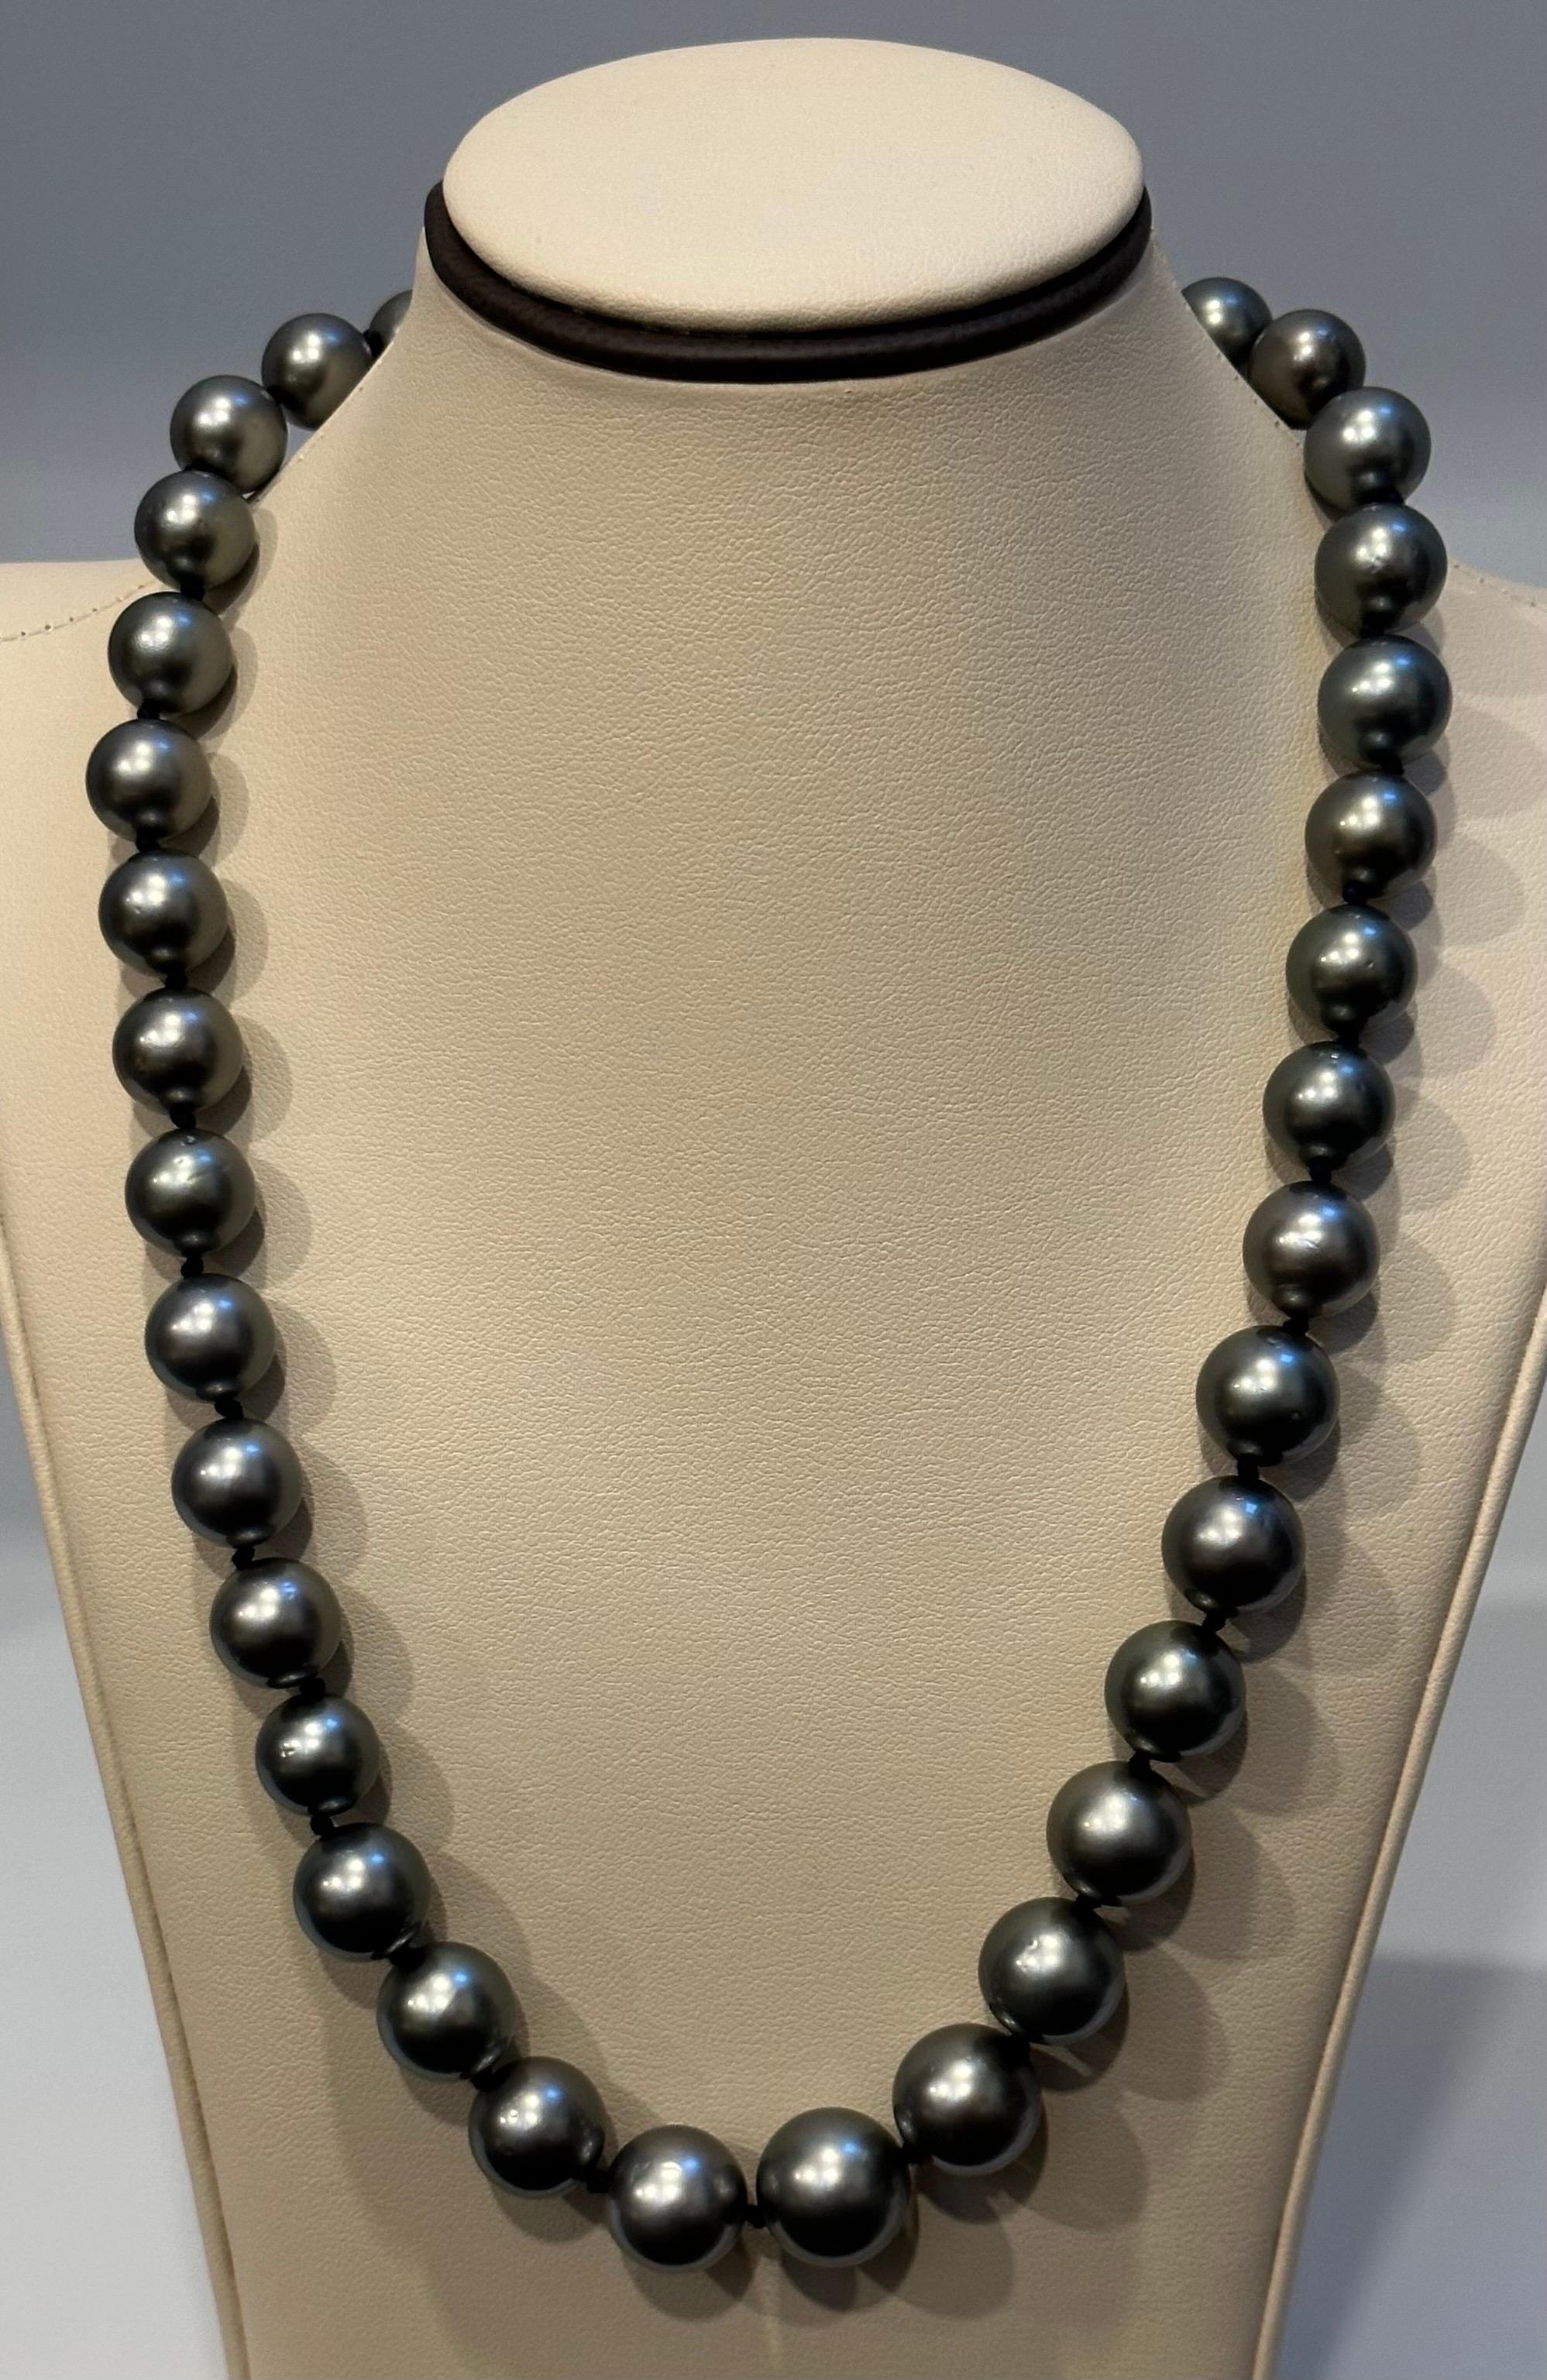 Round Cut 11-15 mm Tahitian Black Graduating Pearls Strand Necklace, Estate, WG For Sale